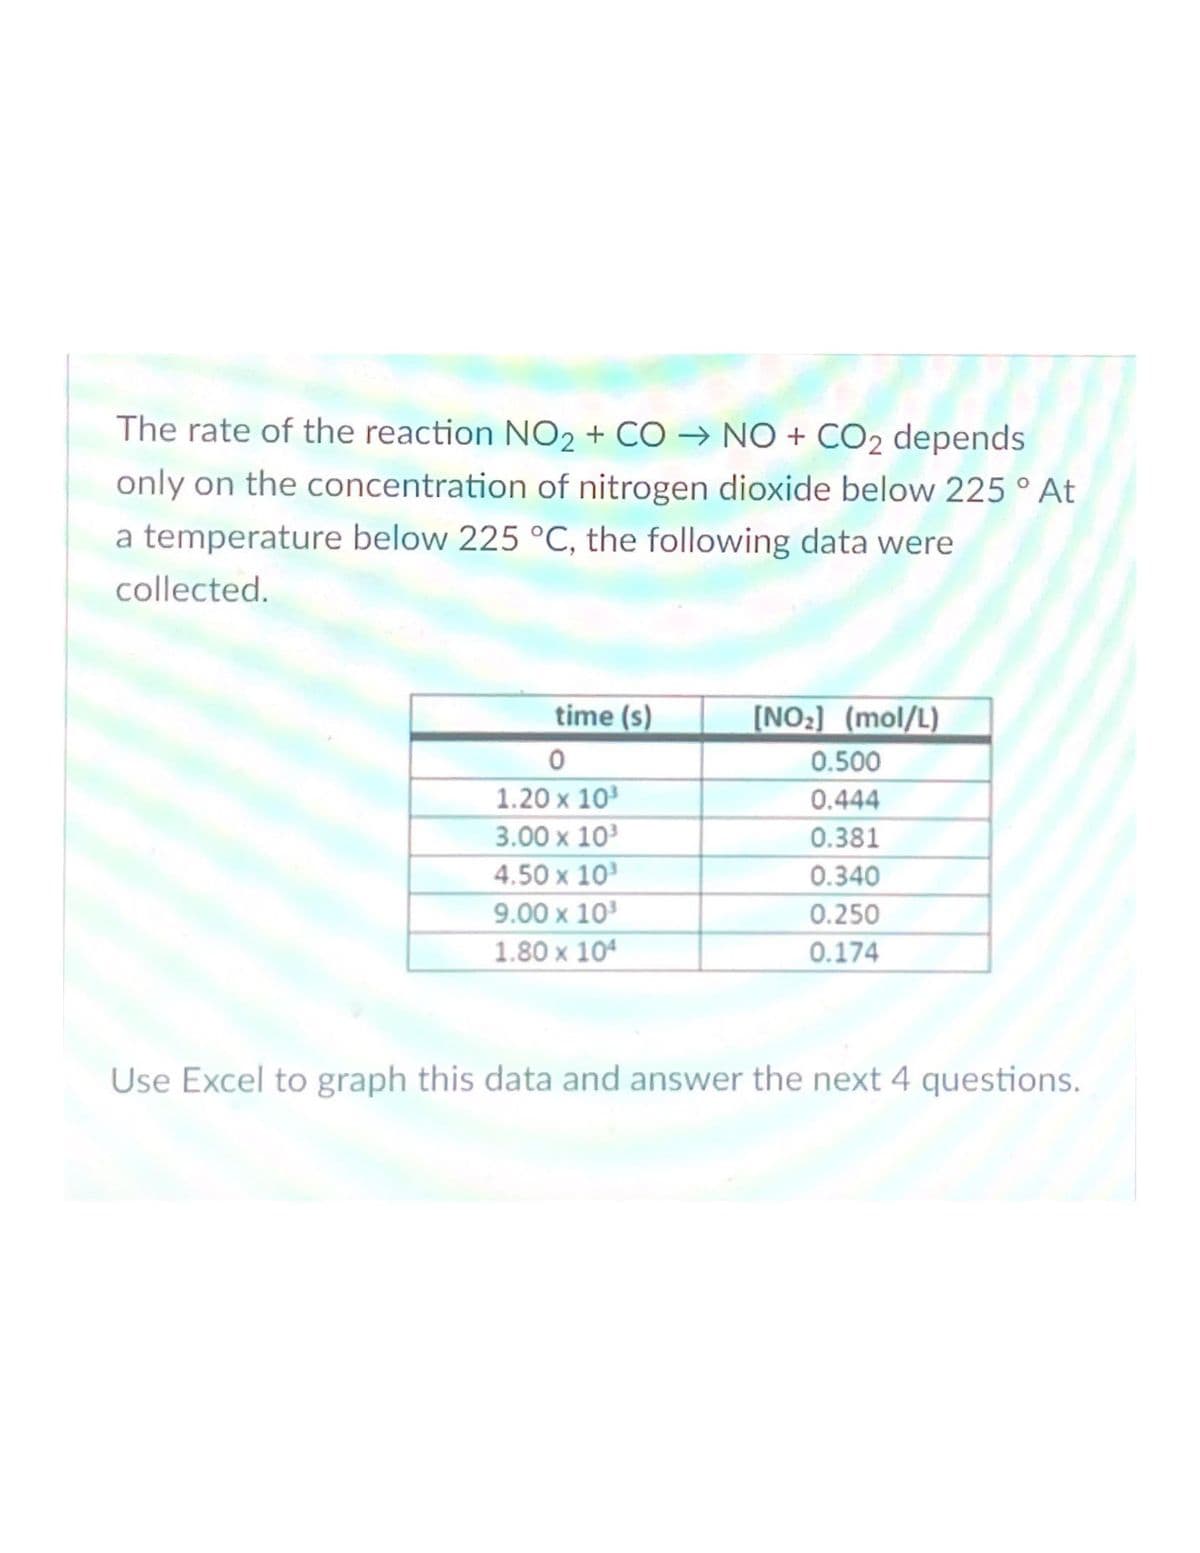 The rate of the reaction NO₂ + CO → NO + CO₂ depends
only on the concentration of nitrogen dioxide below 225 ° At
a temperature below 225 °C, the following data were
collected.
[NO₂] (mol/L)
time (s)
0
0.500
1.20 x 10³
0.444
3.00 x 10³
0.381
4.50 x 10³
0.340
9.00 x 10³
0.250
1.80 x 10²
0.174
Use Excel to graph this data and answer the next 4 questions.